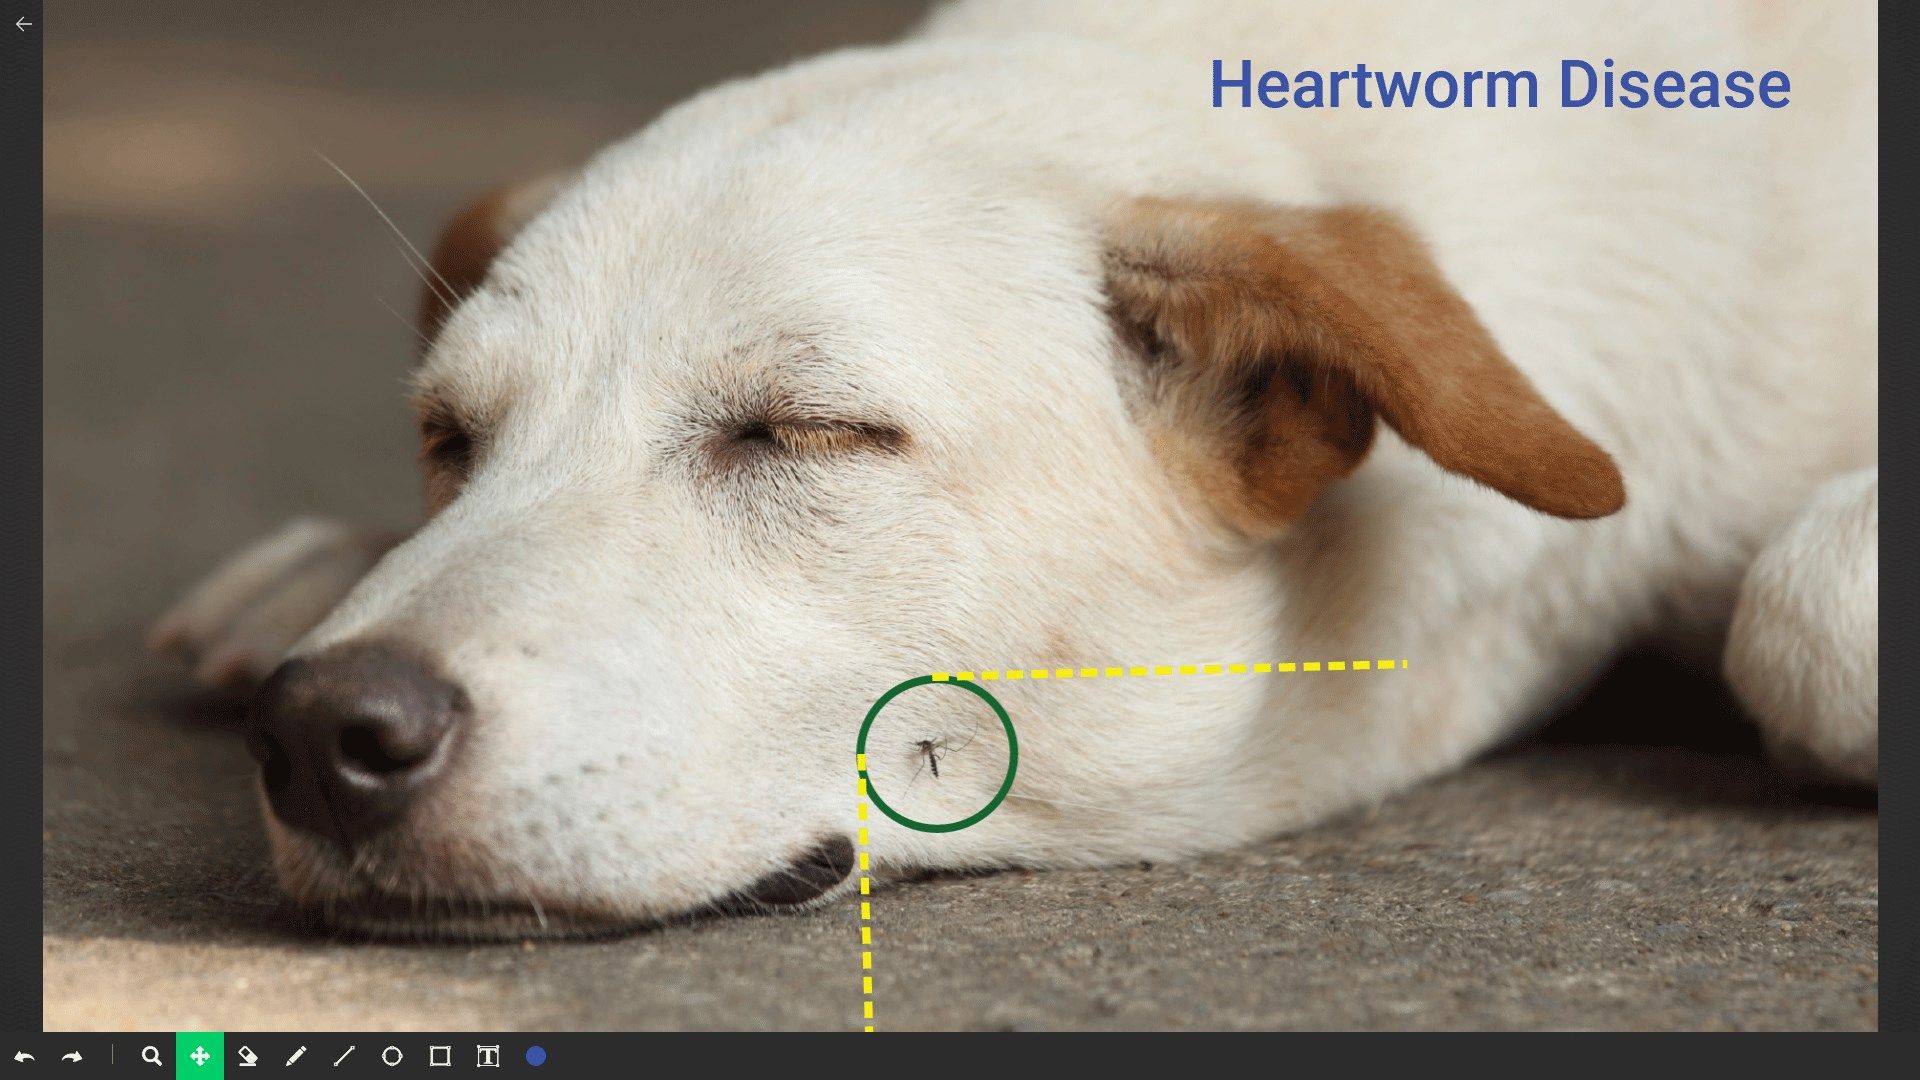 All images can be drawn on, annotated, and saved to your pet owner's file.